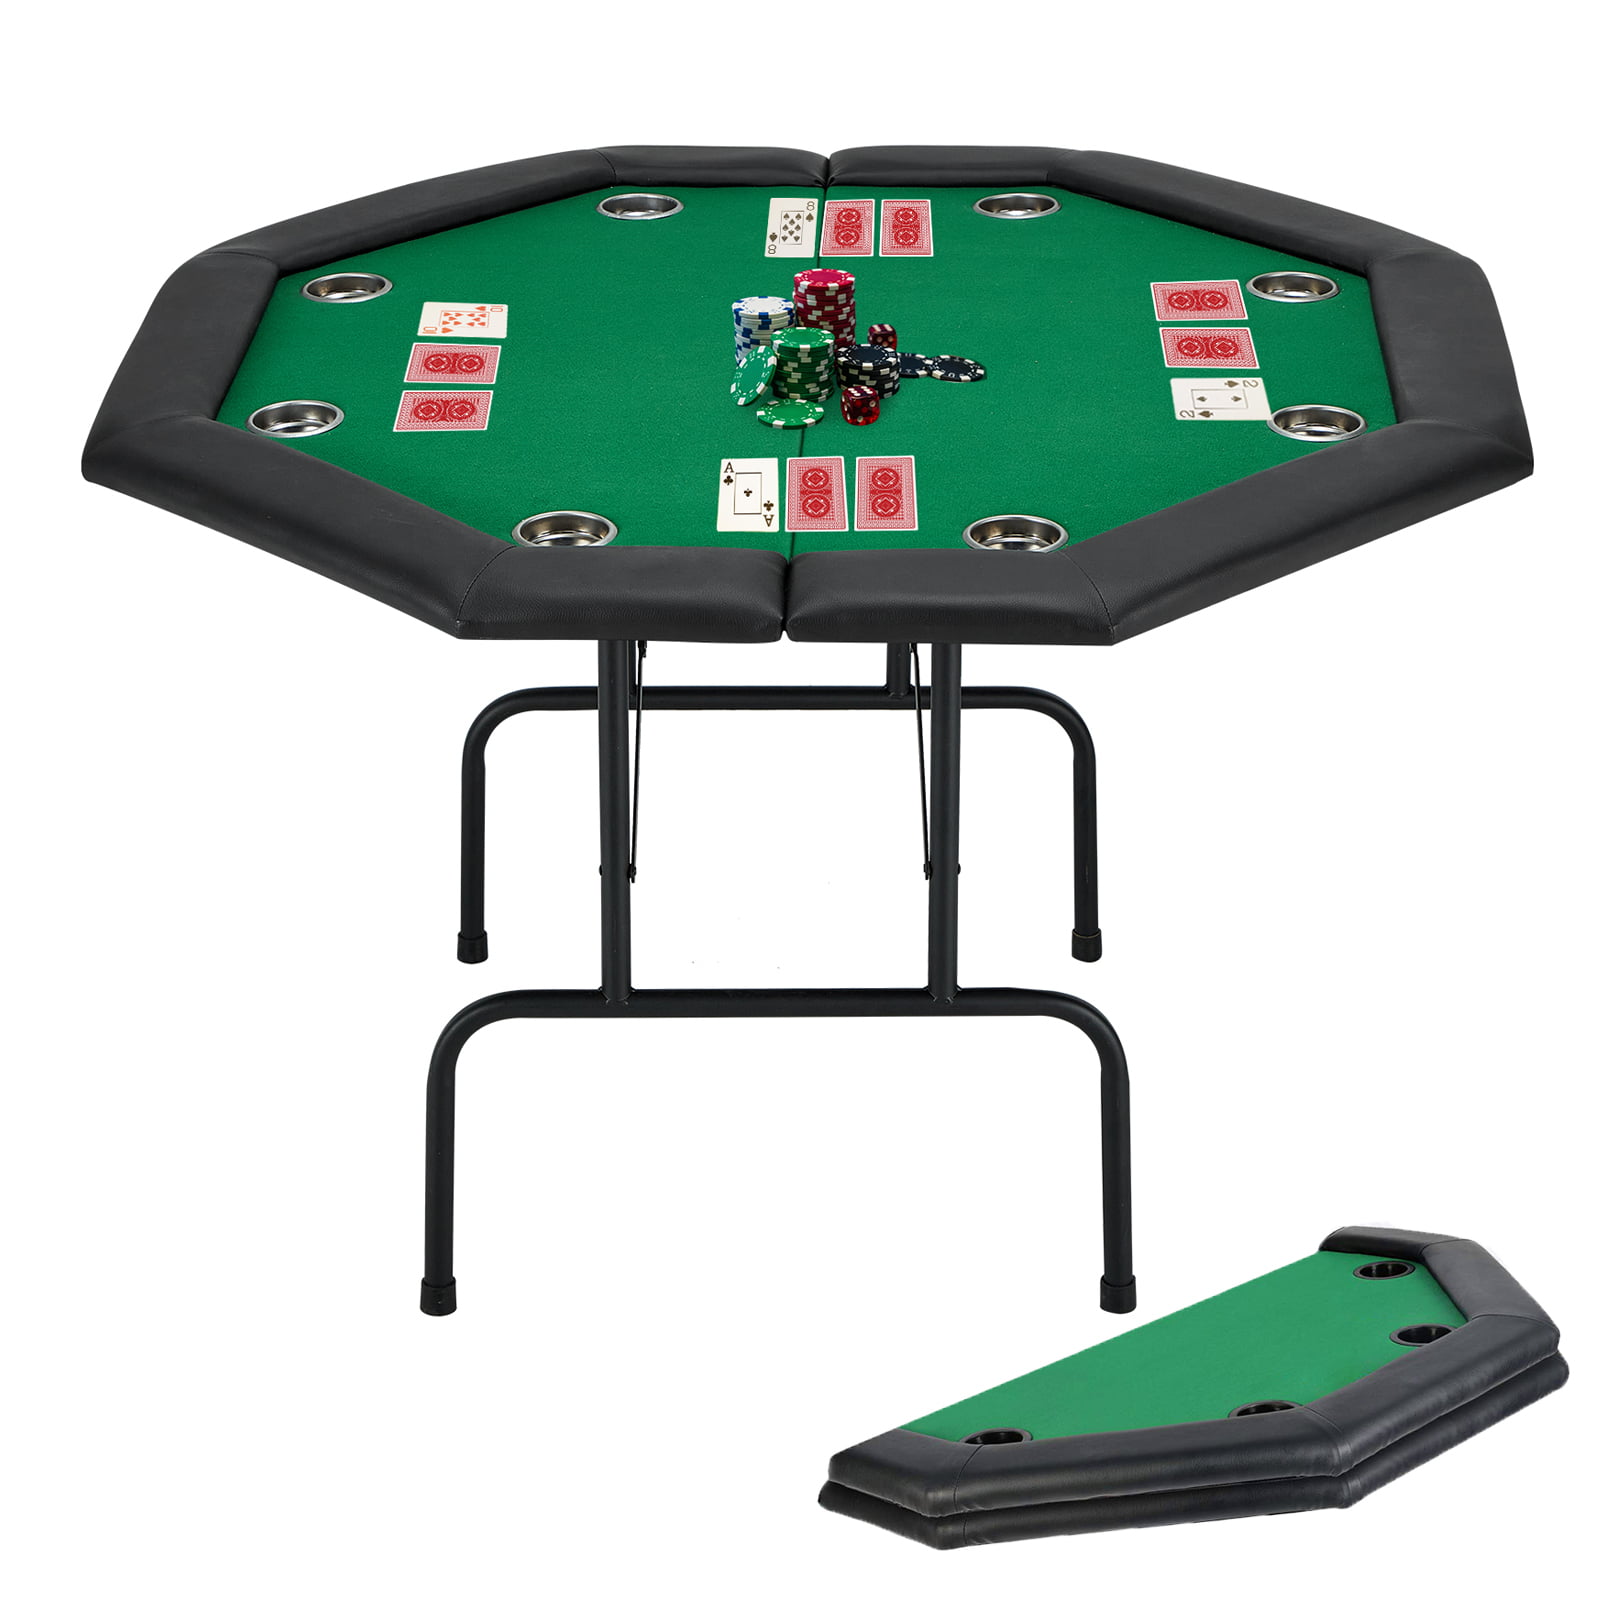 Top Texas Holdem Poker Table for 8 Player w/Leg Green Felt ECOTOUGE Game Poker Table w/Stainless Steel Cup Holder Casino Leisure Table 